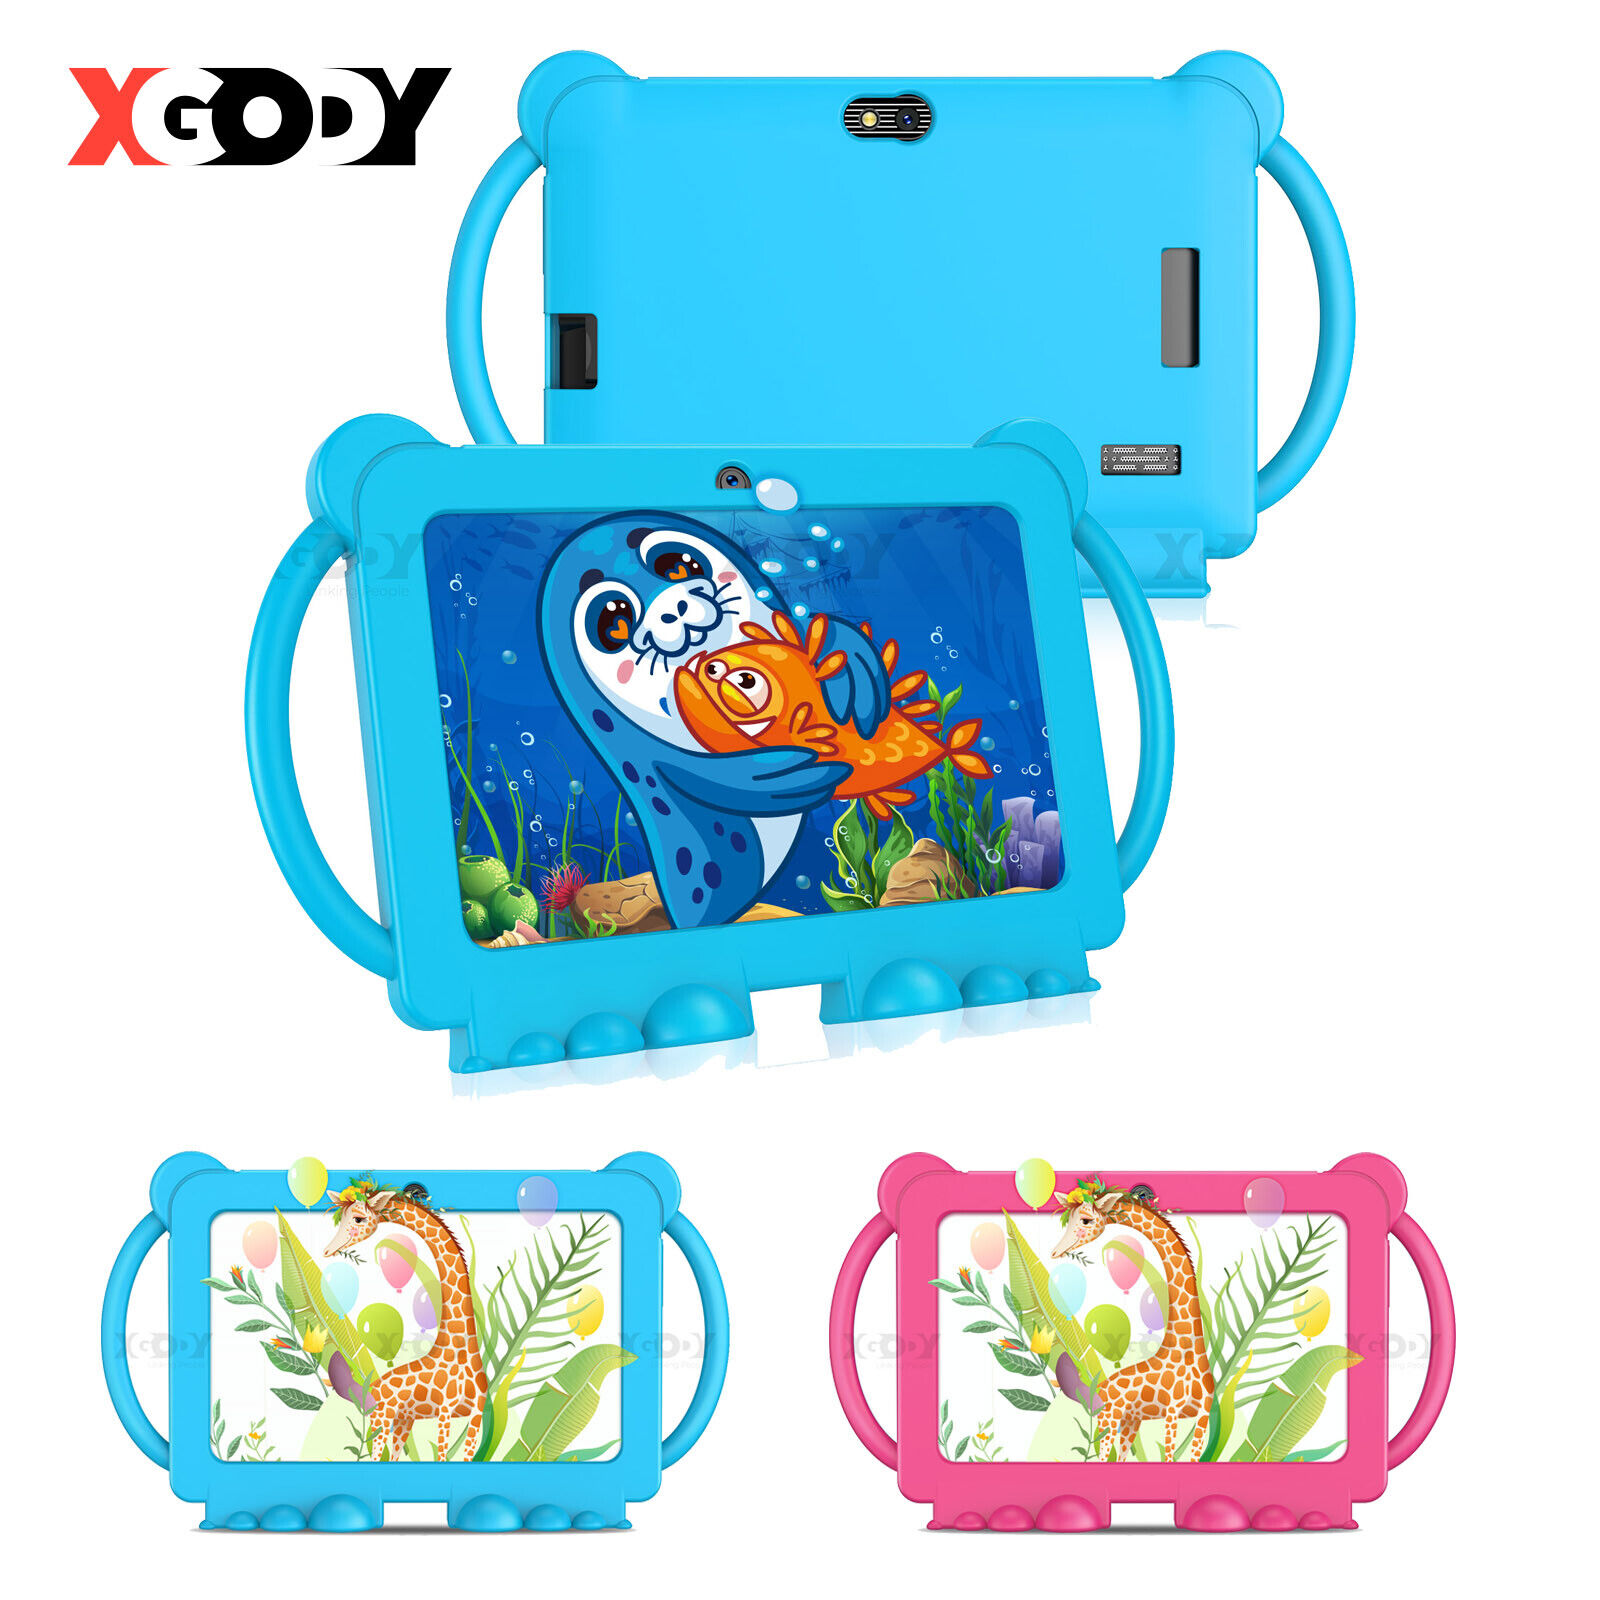 Kids Tablet 7in Tablet for Kids 64GB Android 12 WiFi YouTube Netflix Google Play